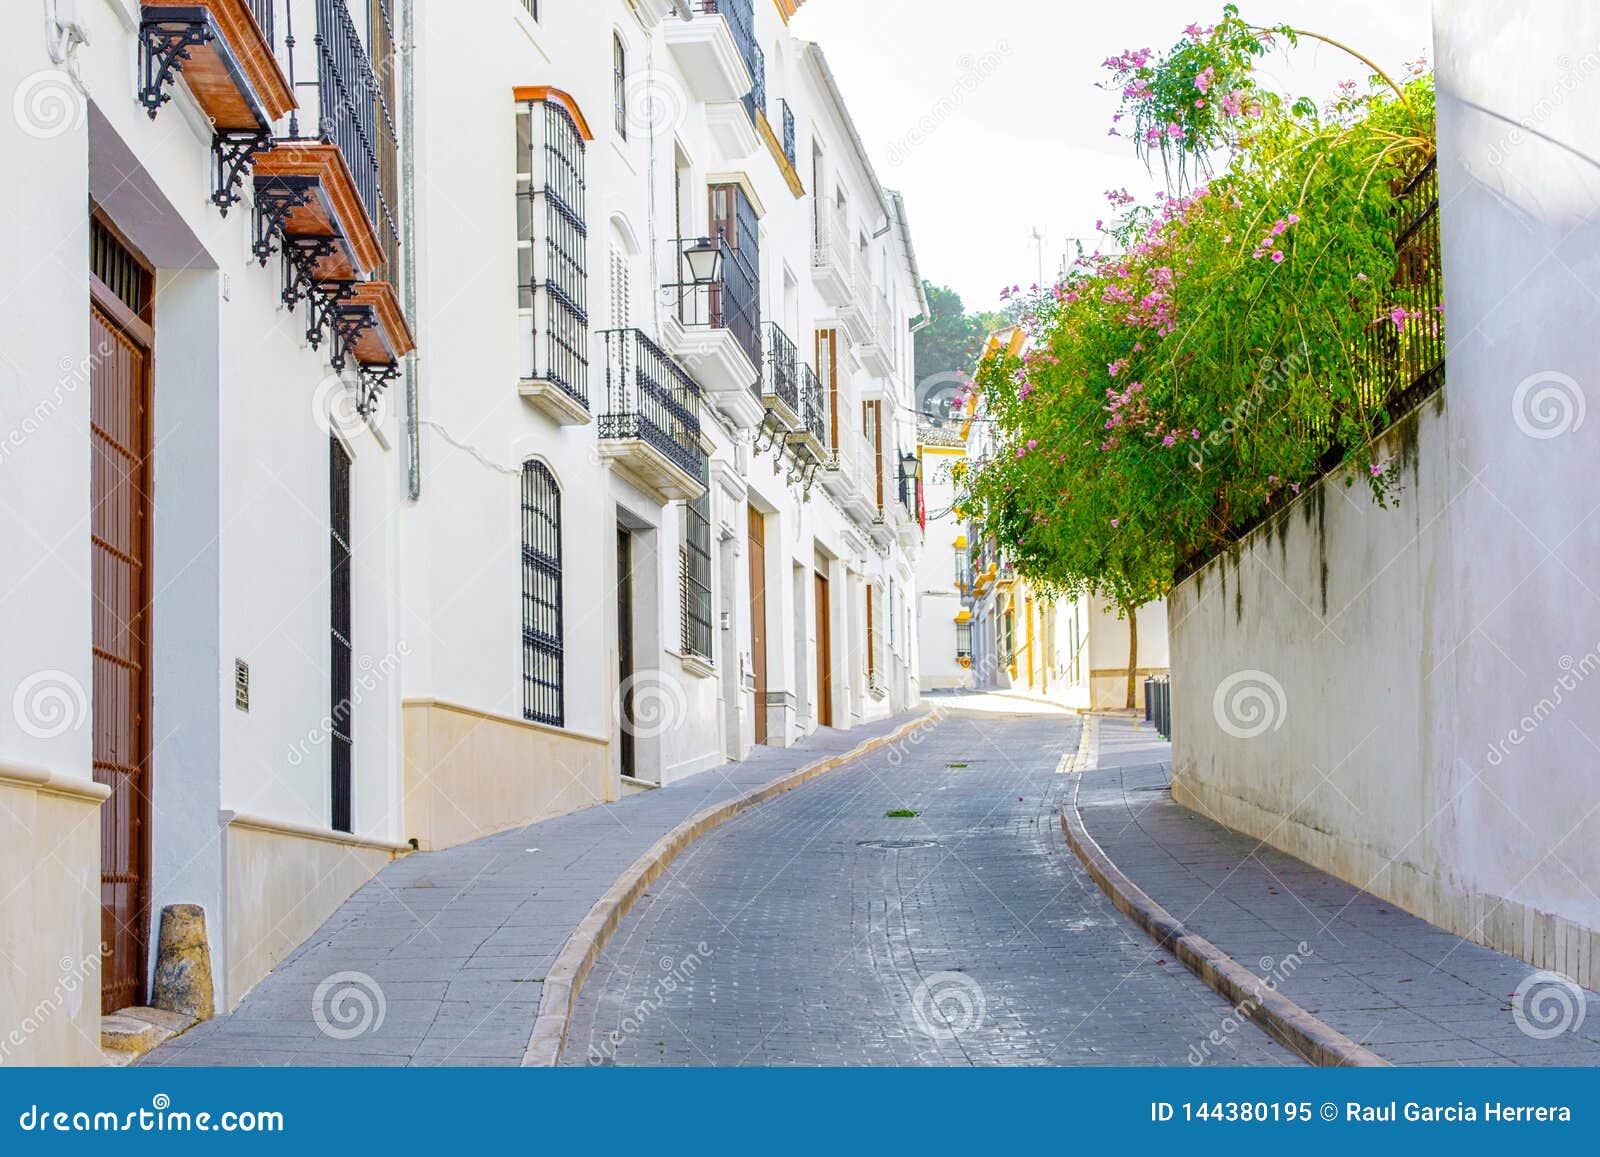 beautiful street in estepa, province of seville. charming white village in andalusia. southern spain.